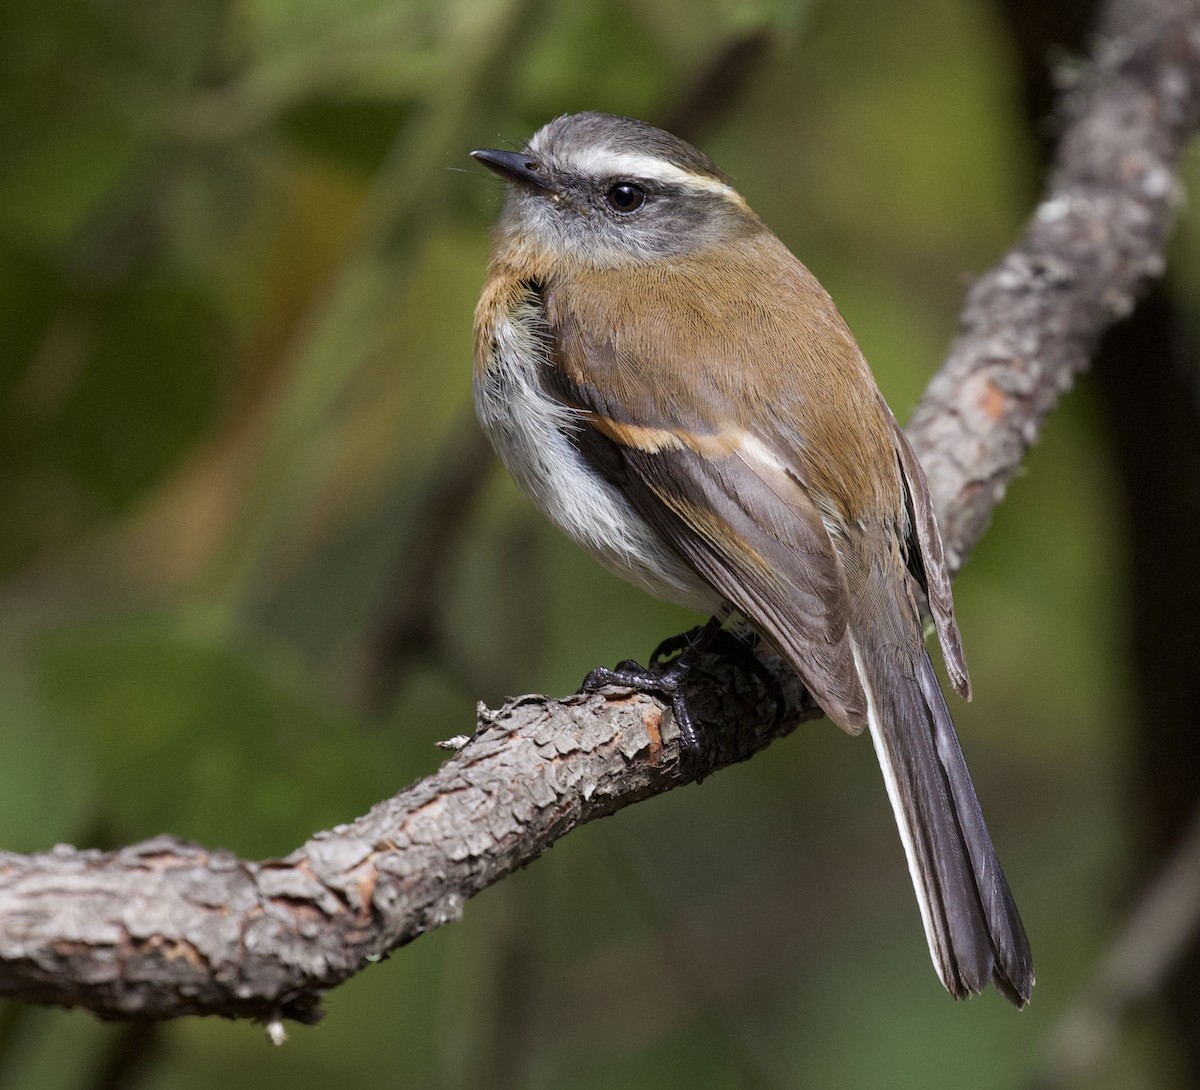 Rufous-breasted Chat-Tyrant - David Ascanio